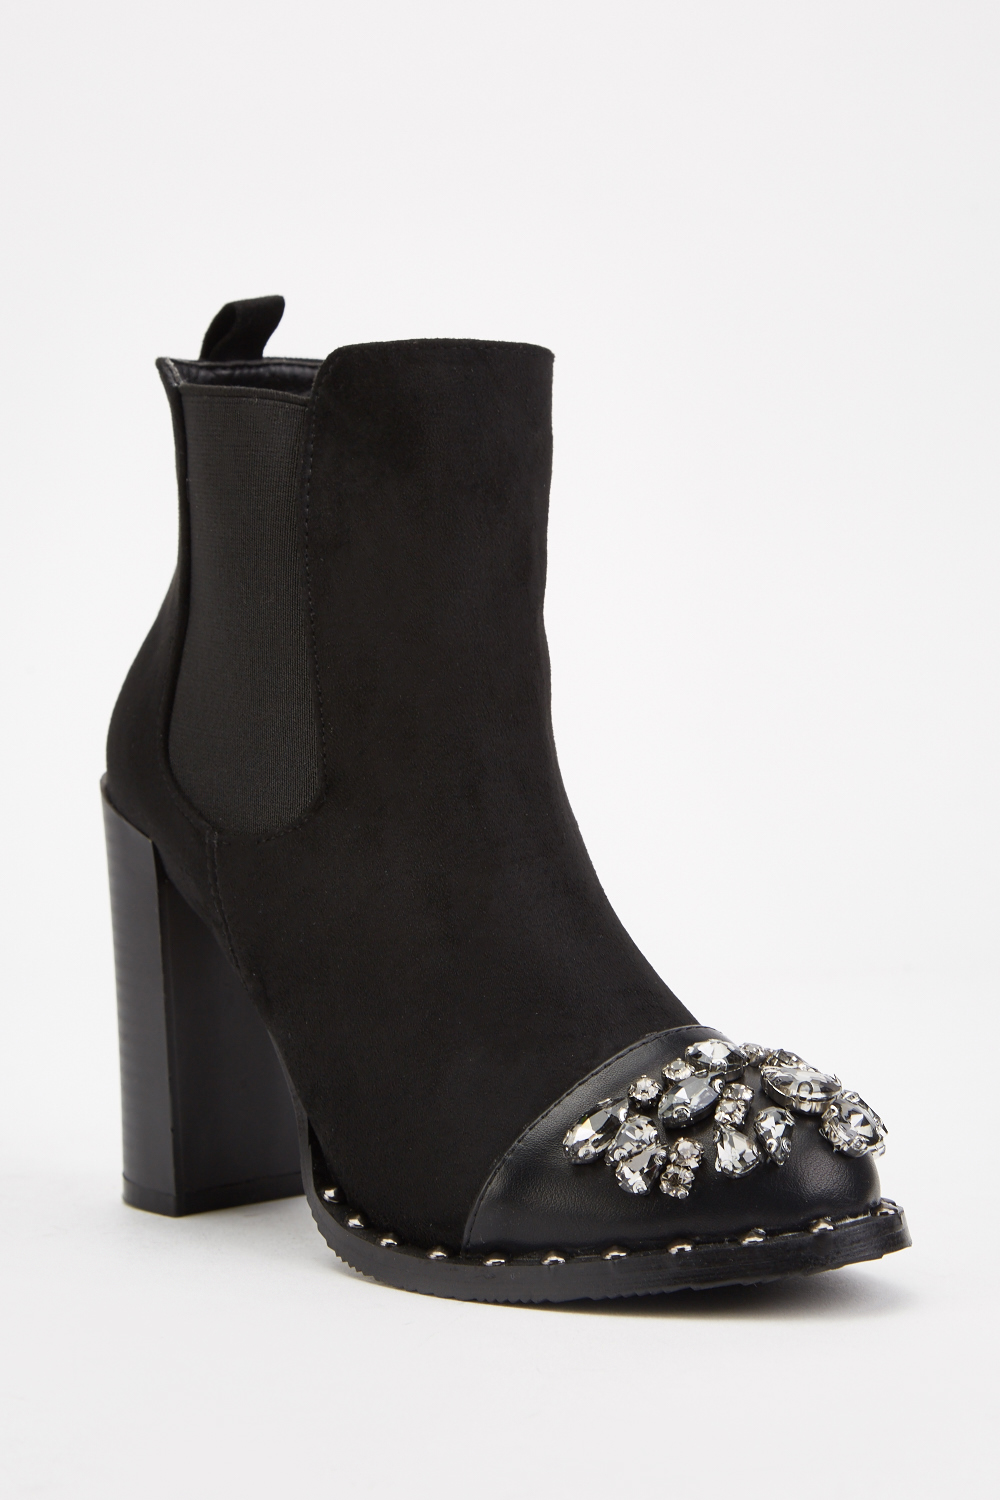 Gemstone Encrusted Ankle Boots - Just $7